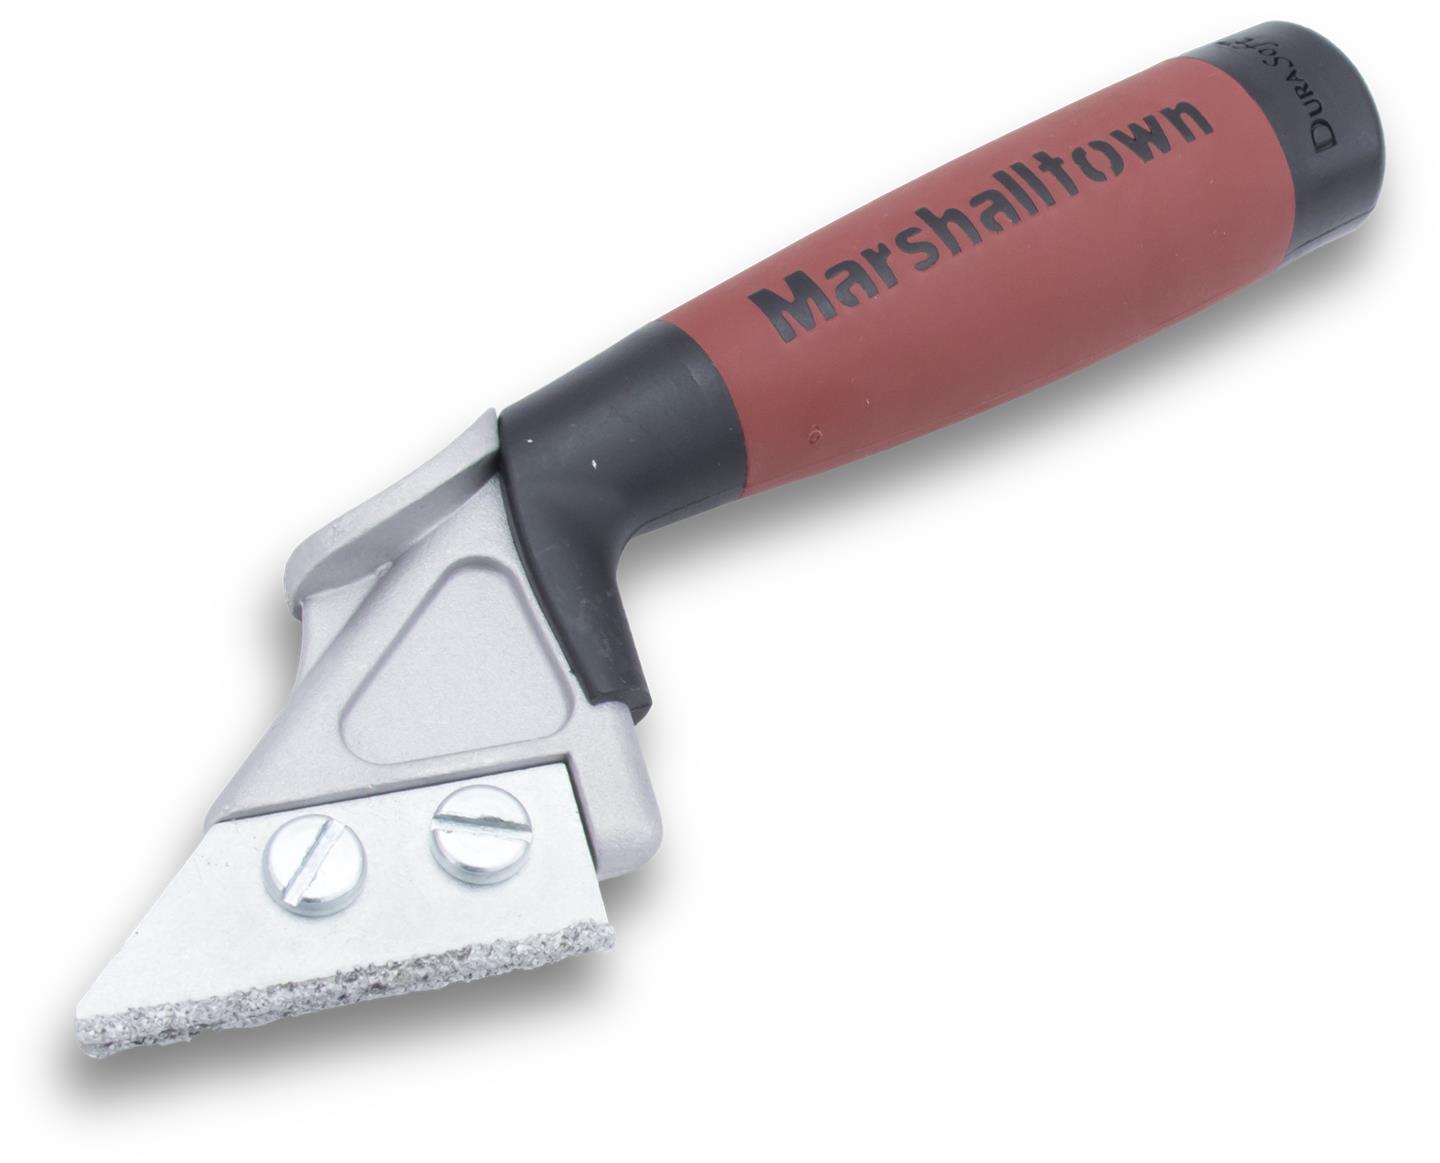 Marshalltown 15470 Tiling & Flooring Grout Saw with Dura-Soft Handle